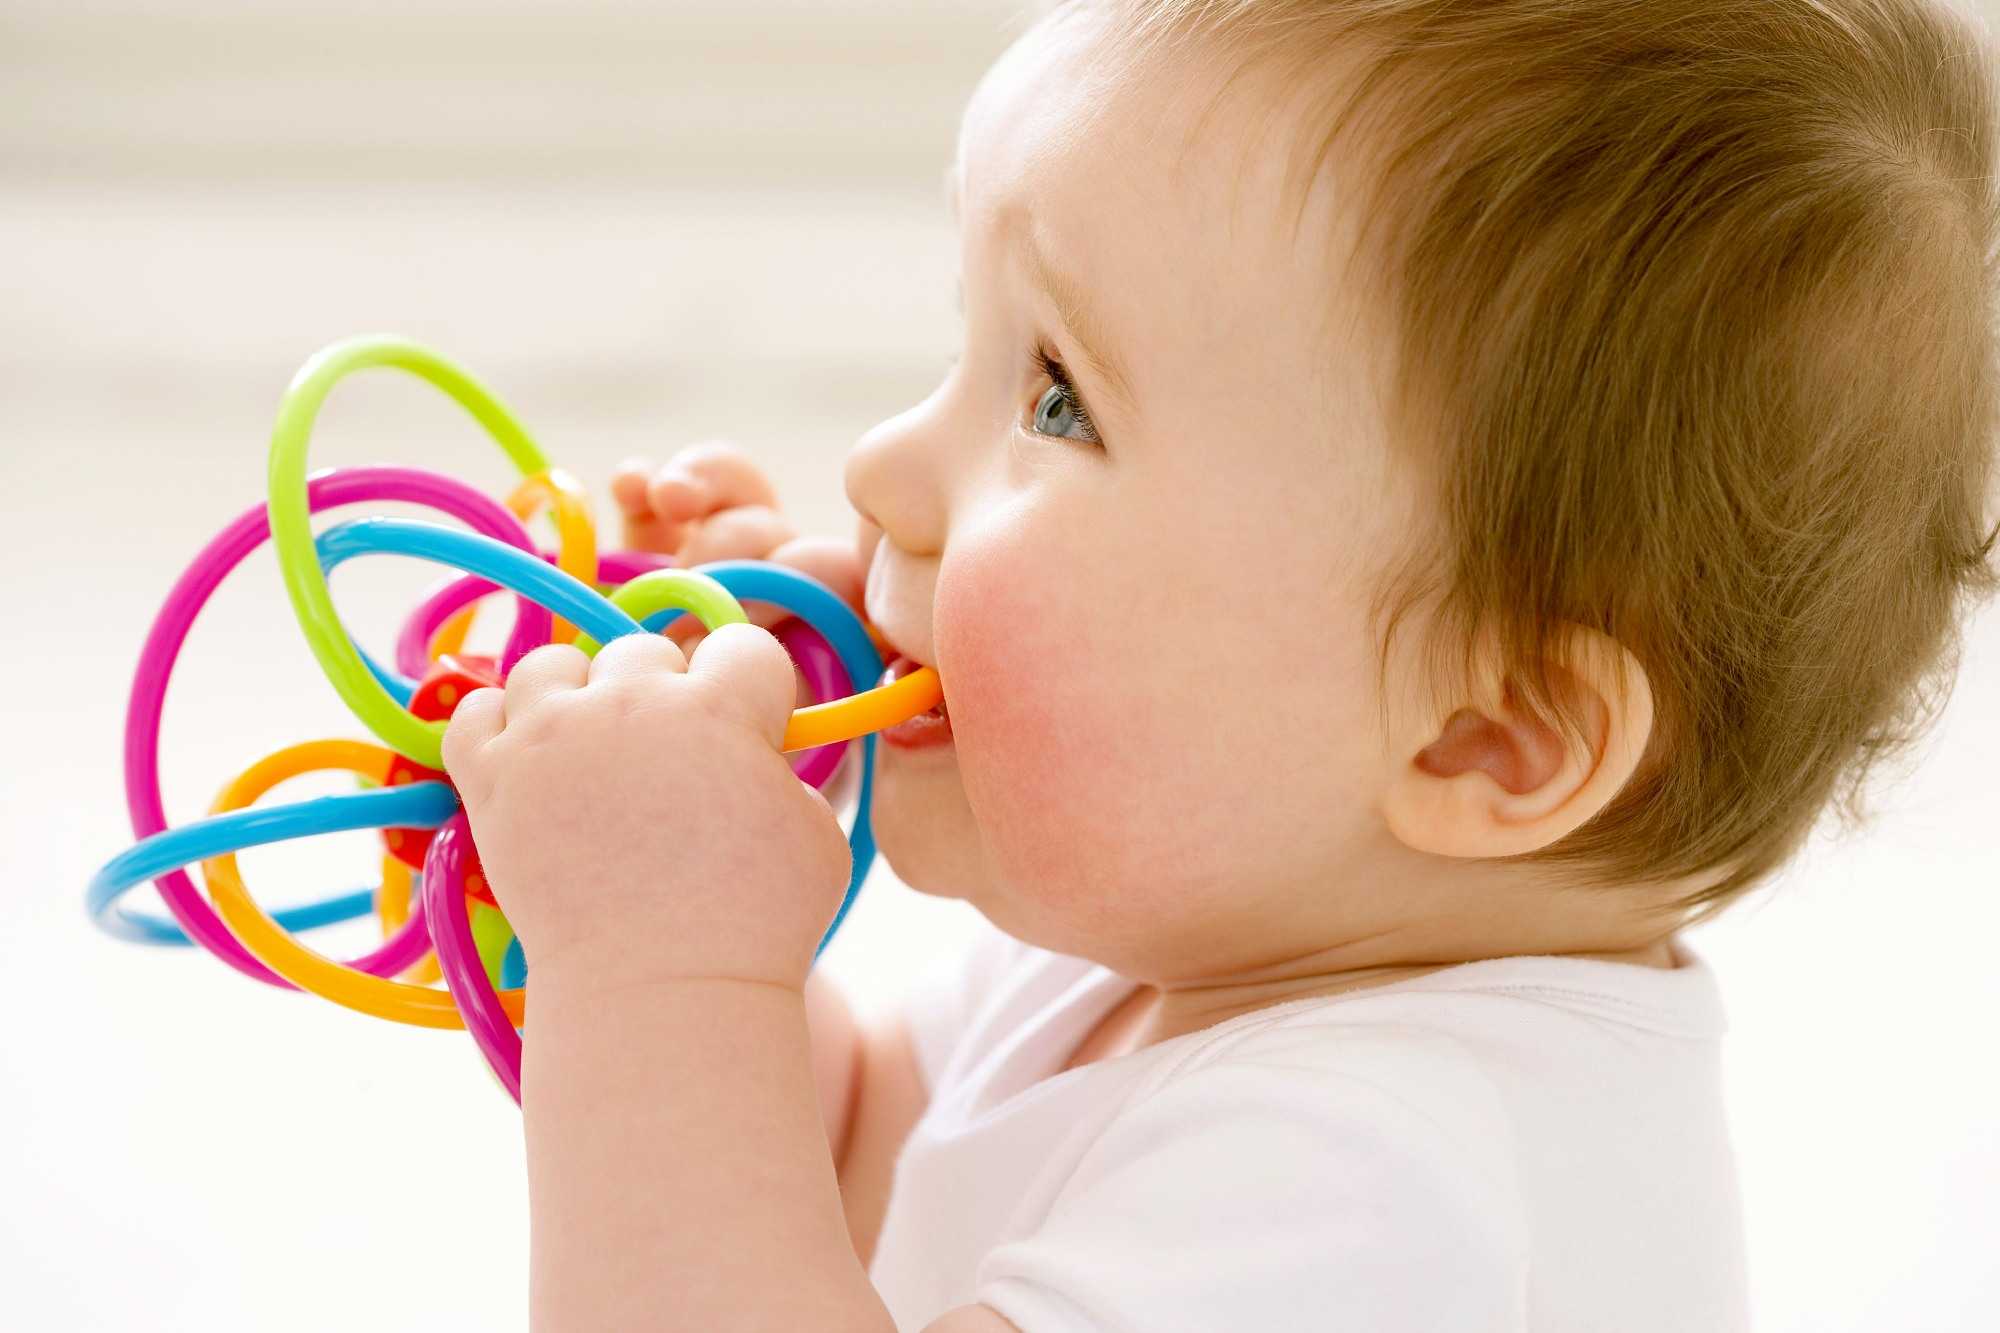 toddler chewing on colourful toy